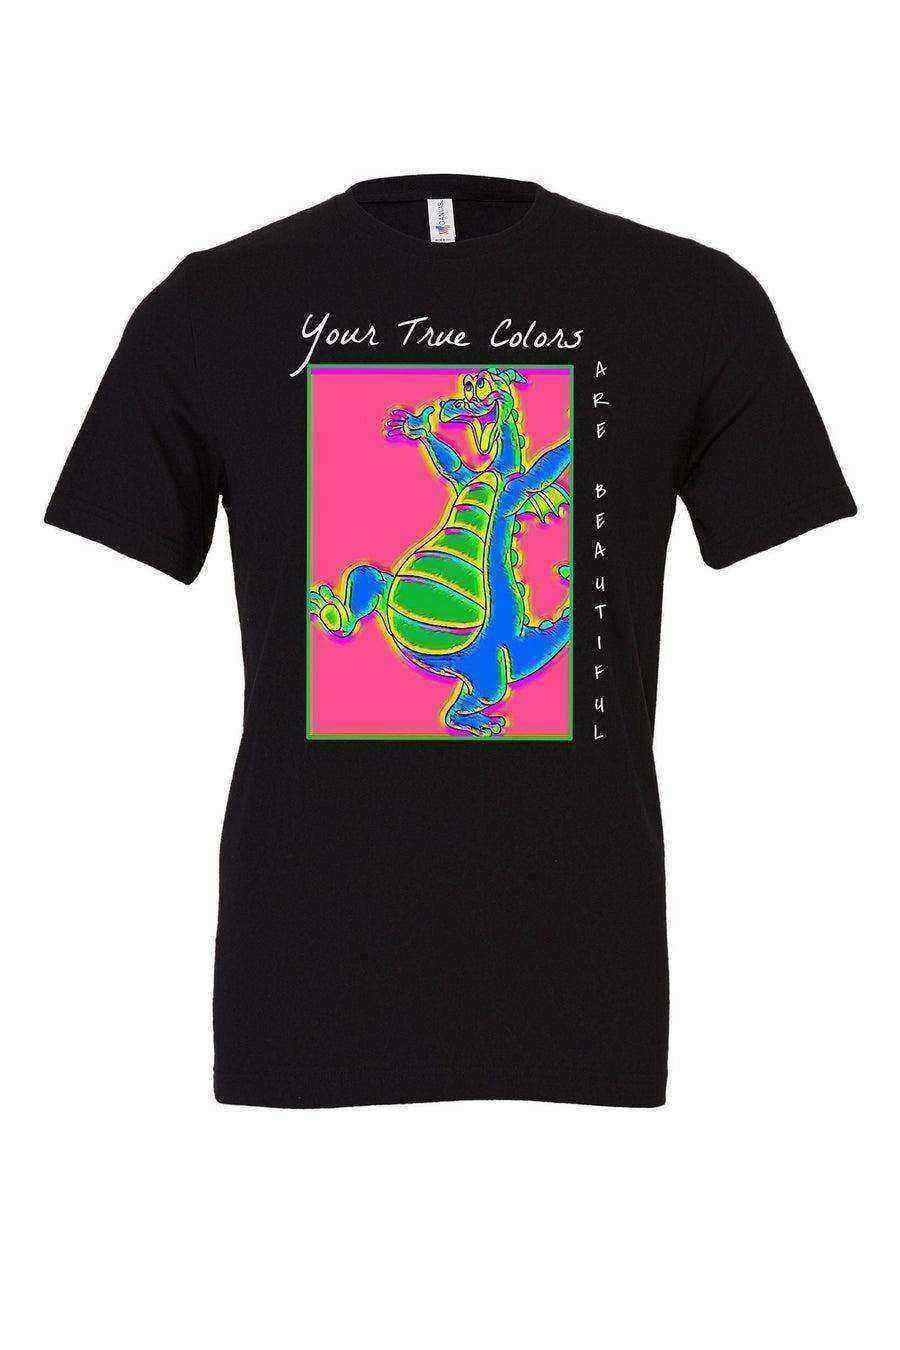 Youth | Figment True Colors Shirt | Epcot Shirt - Dylan's Tees